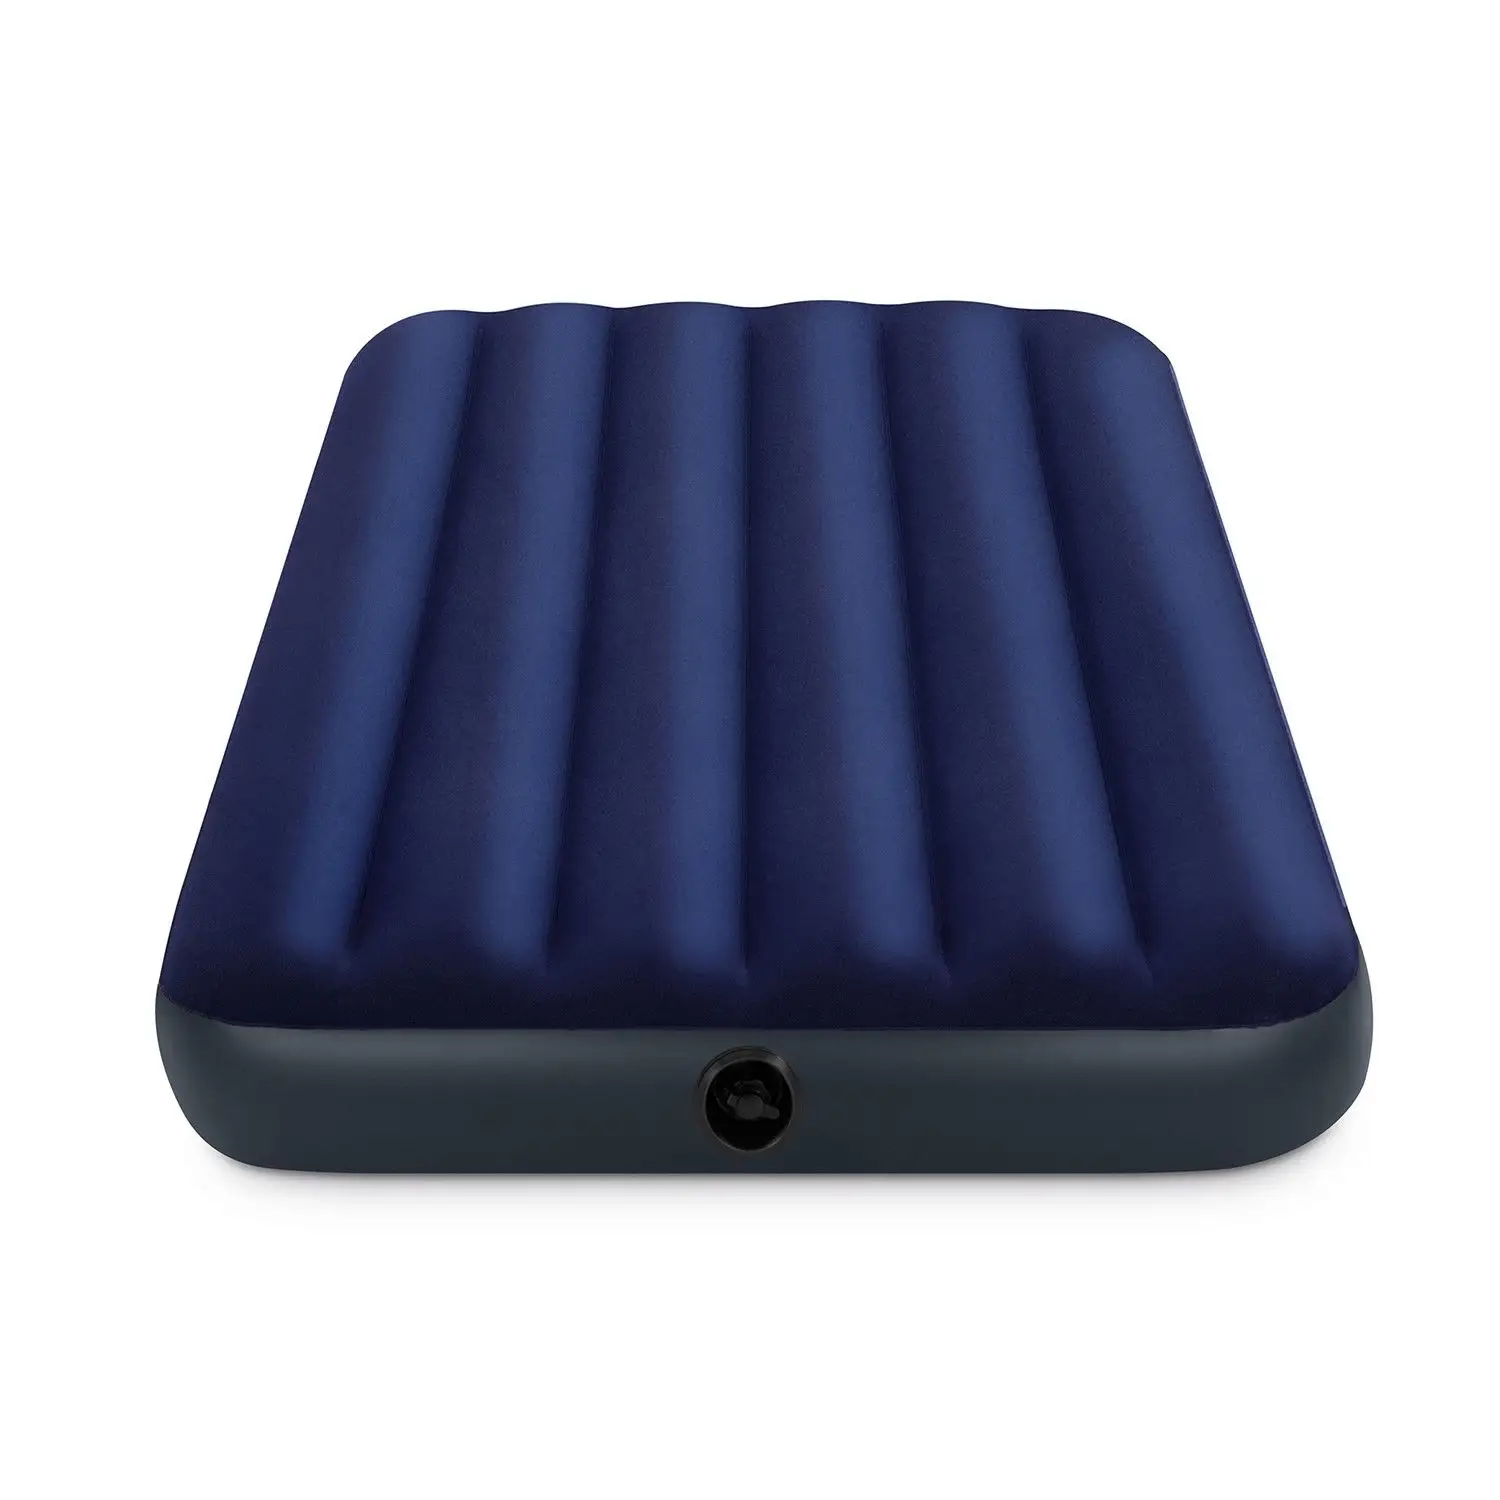 Wholesale inflatable double sofa bed air mattress with air pump pvc air bed with built in pump